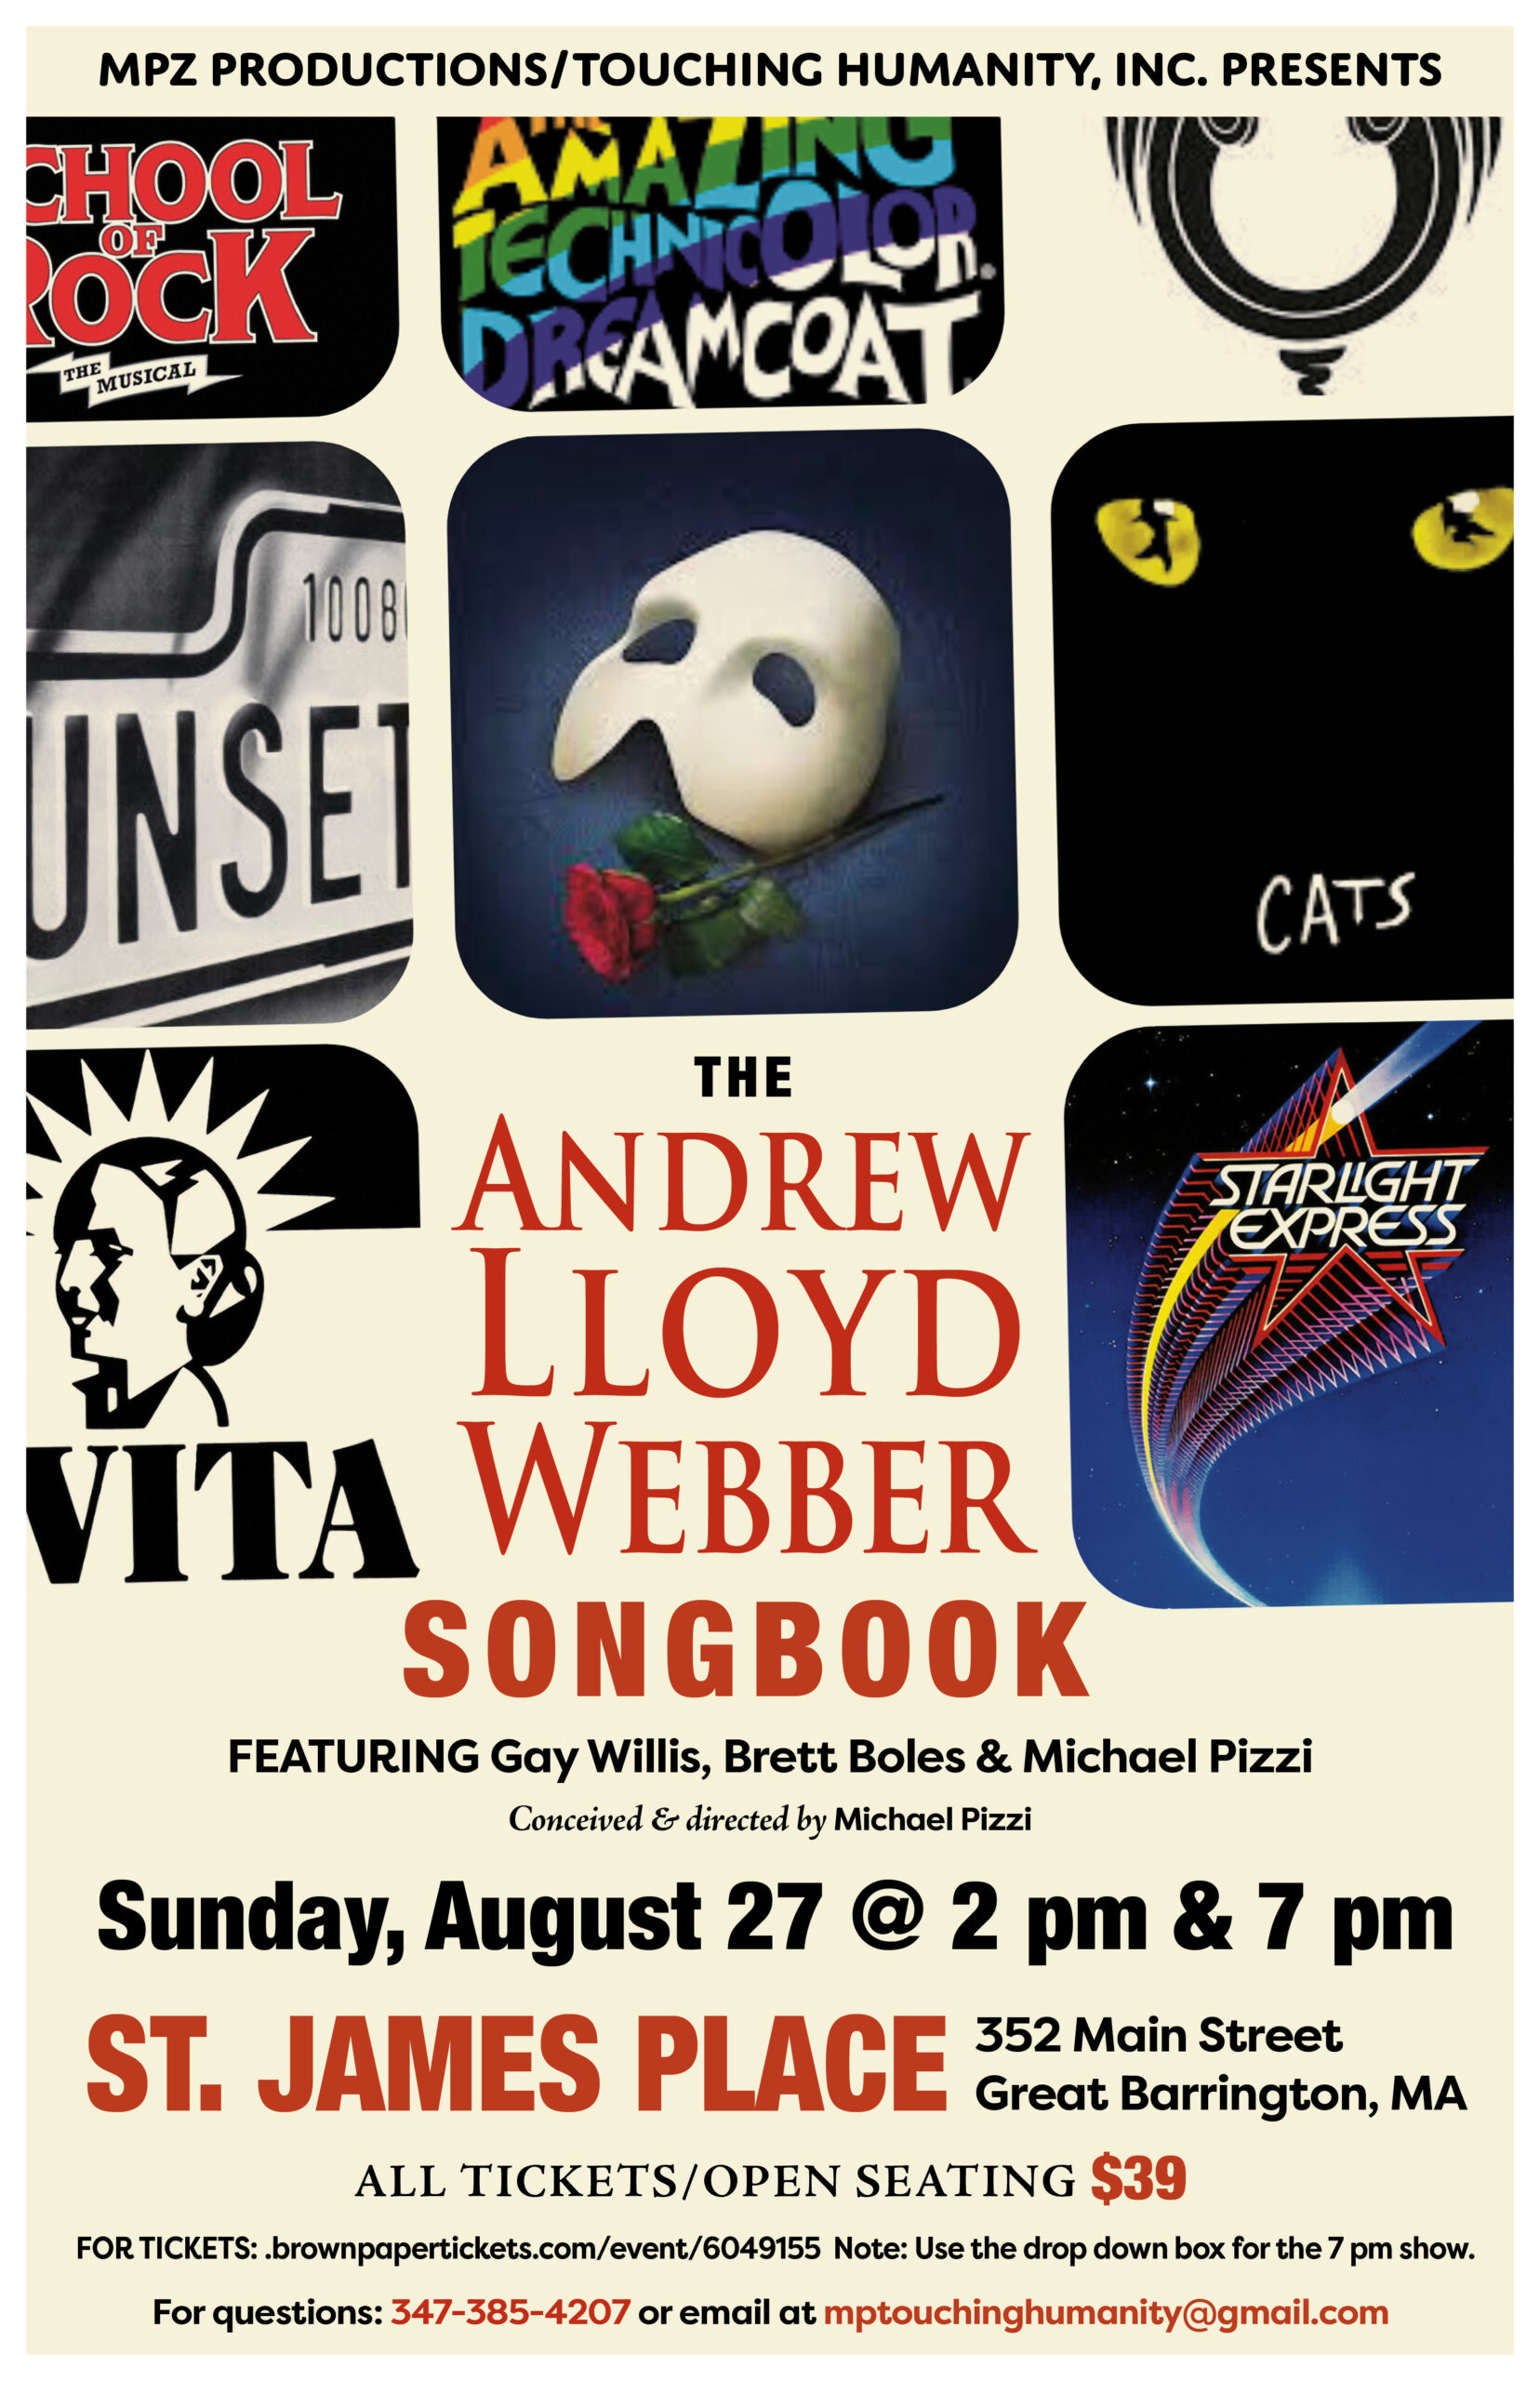 Poster of imagery of Andrew Lloyd Webber musicals performance sunday, august 27 at 2pm and 7pm at Saint James Place, 352 Main Street, Great Barrington, Massachusetts. Call 347.385.4207 with questions.